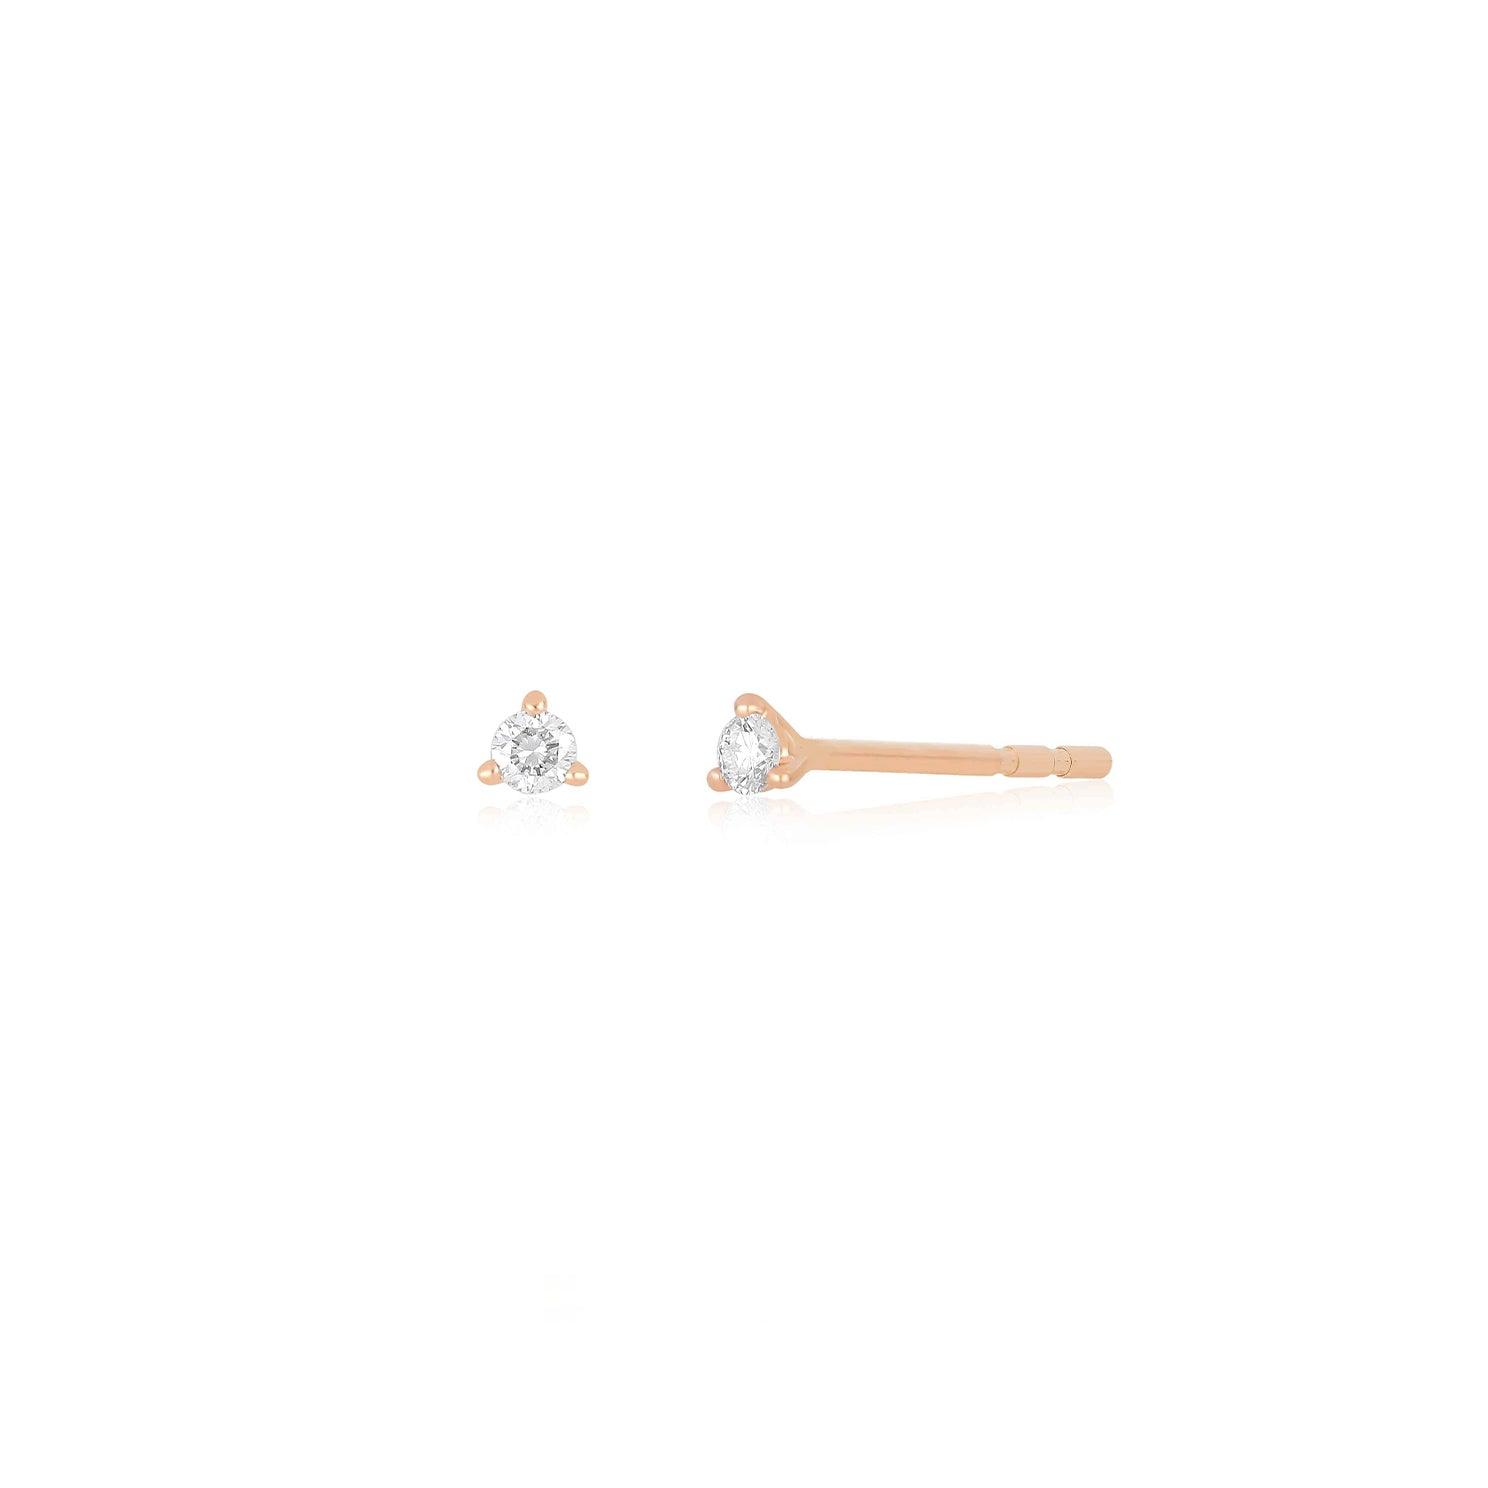 BABY stud earrings floral | FARO Official Store